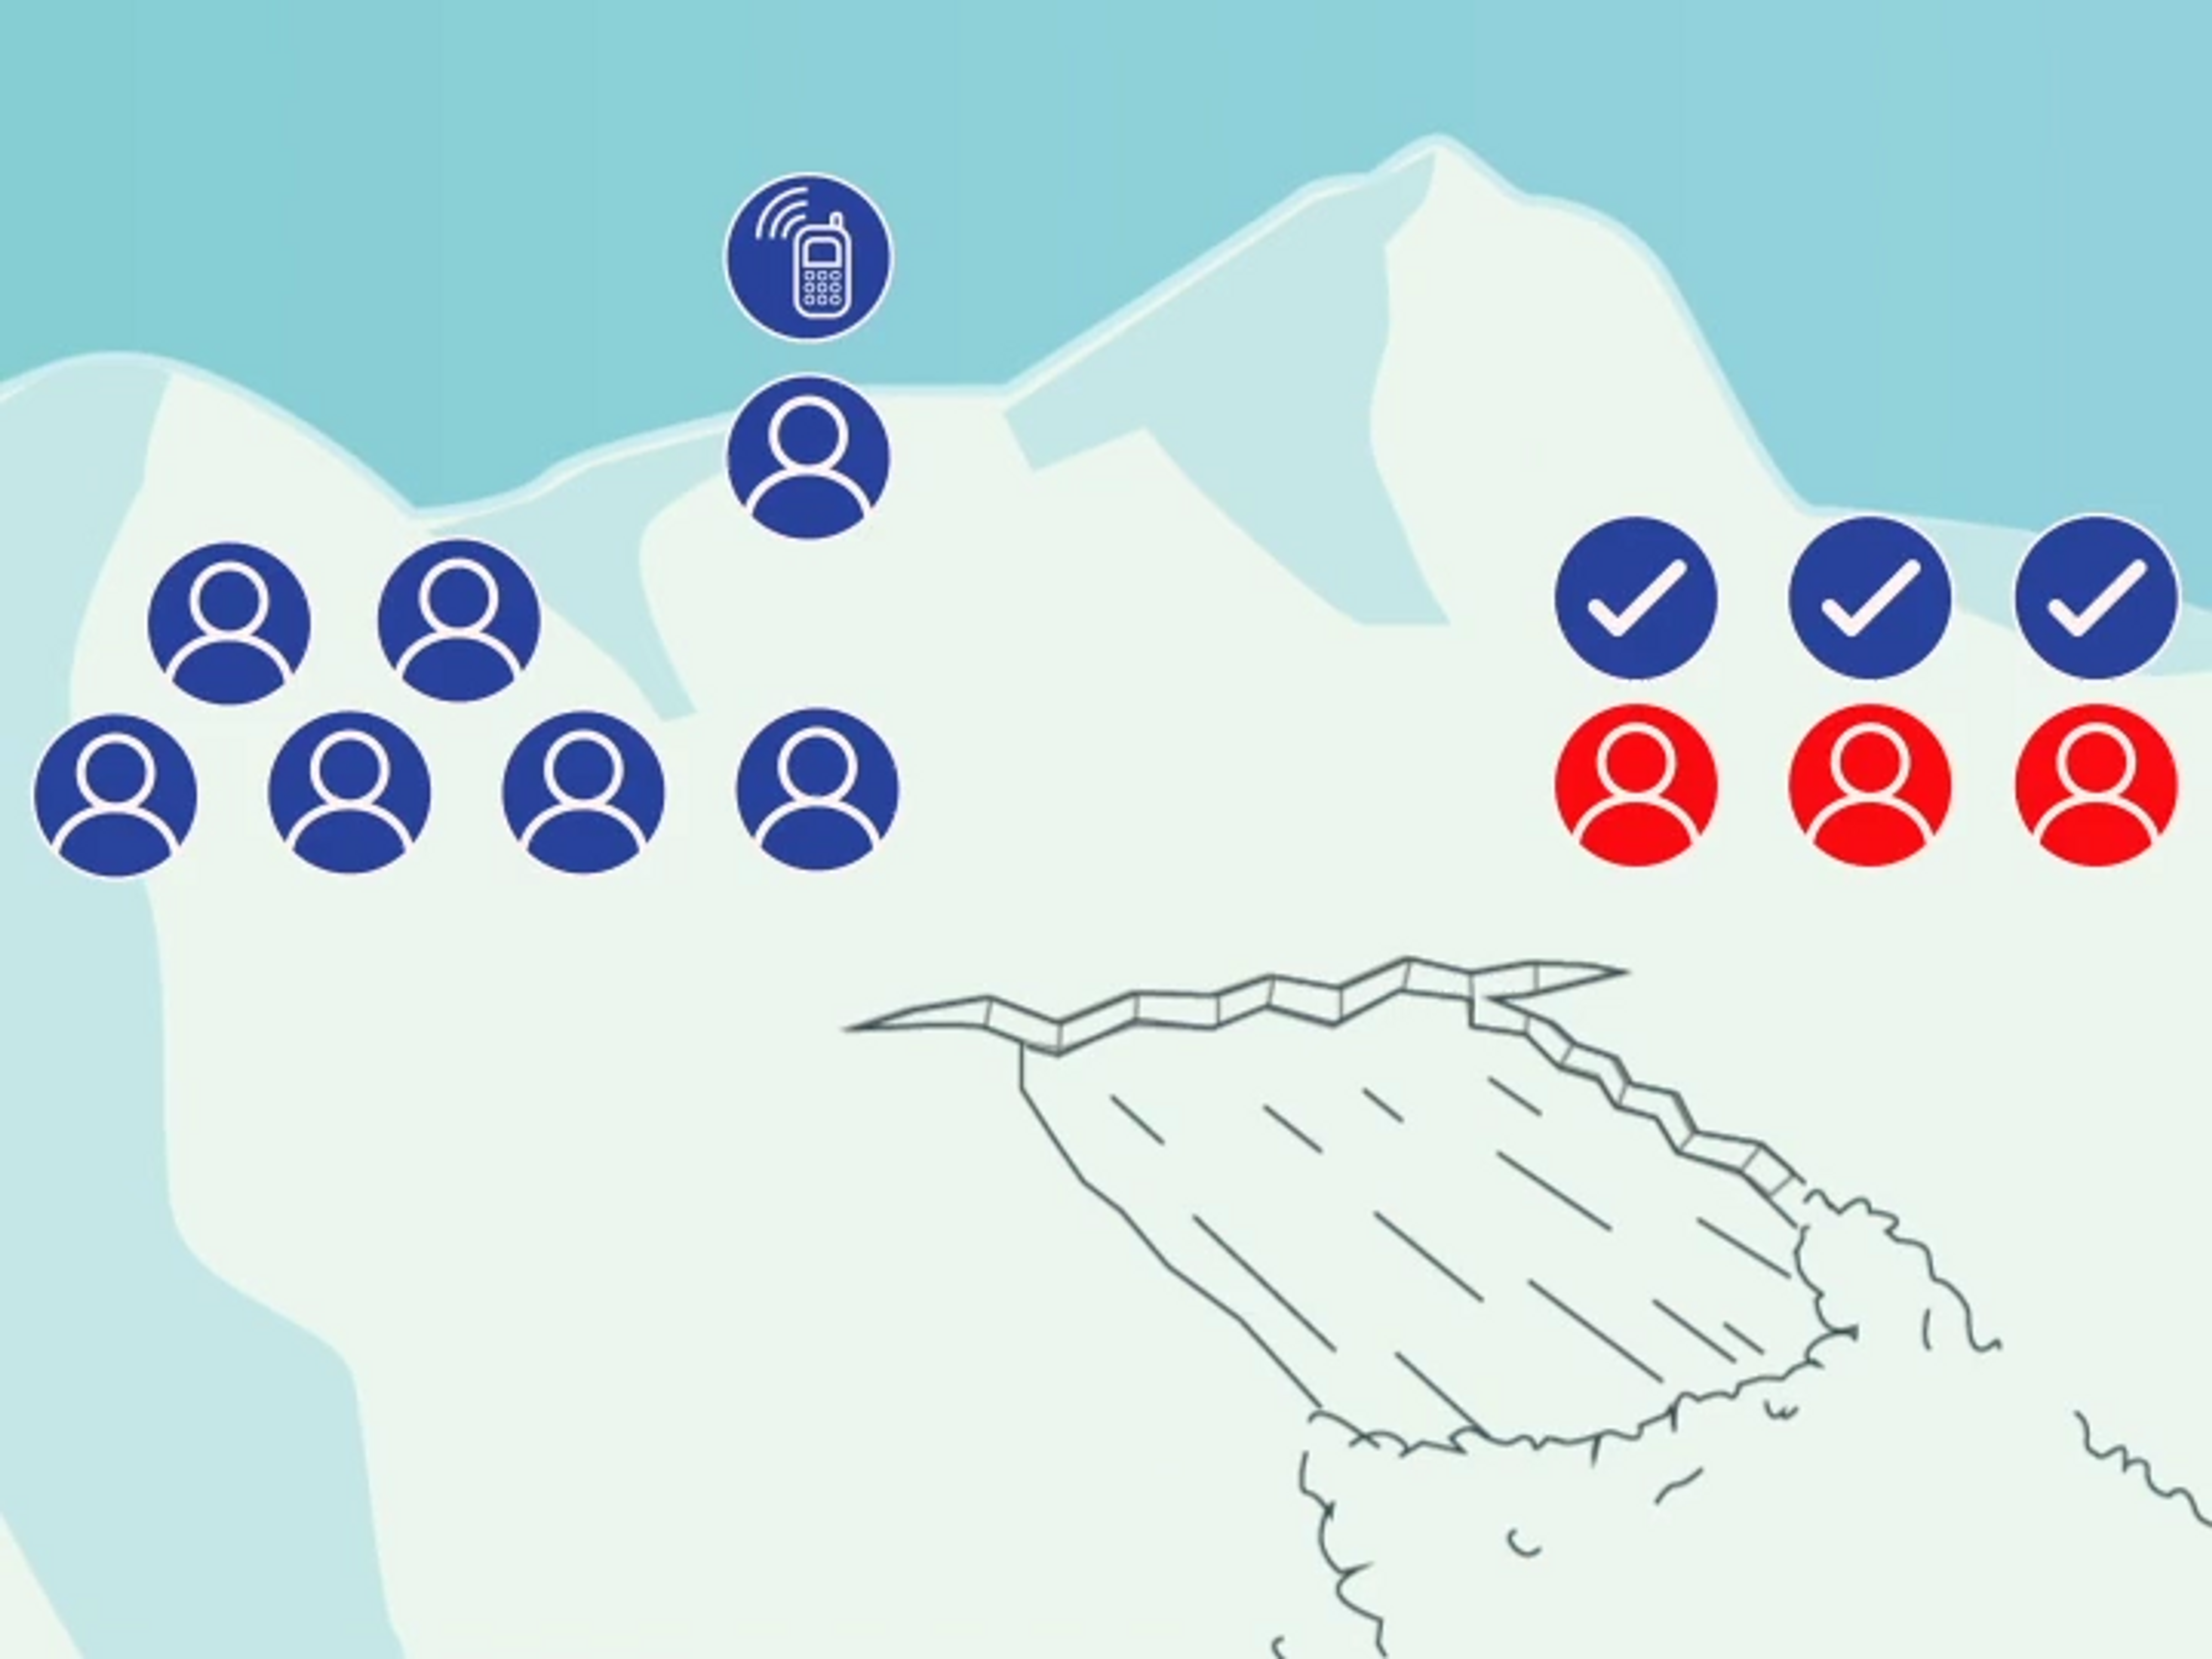 Diagram showing who might be available to help in an avalanche and when to call them.